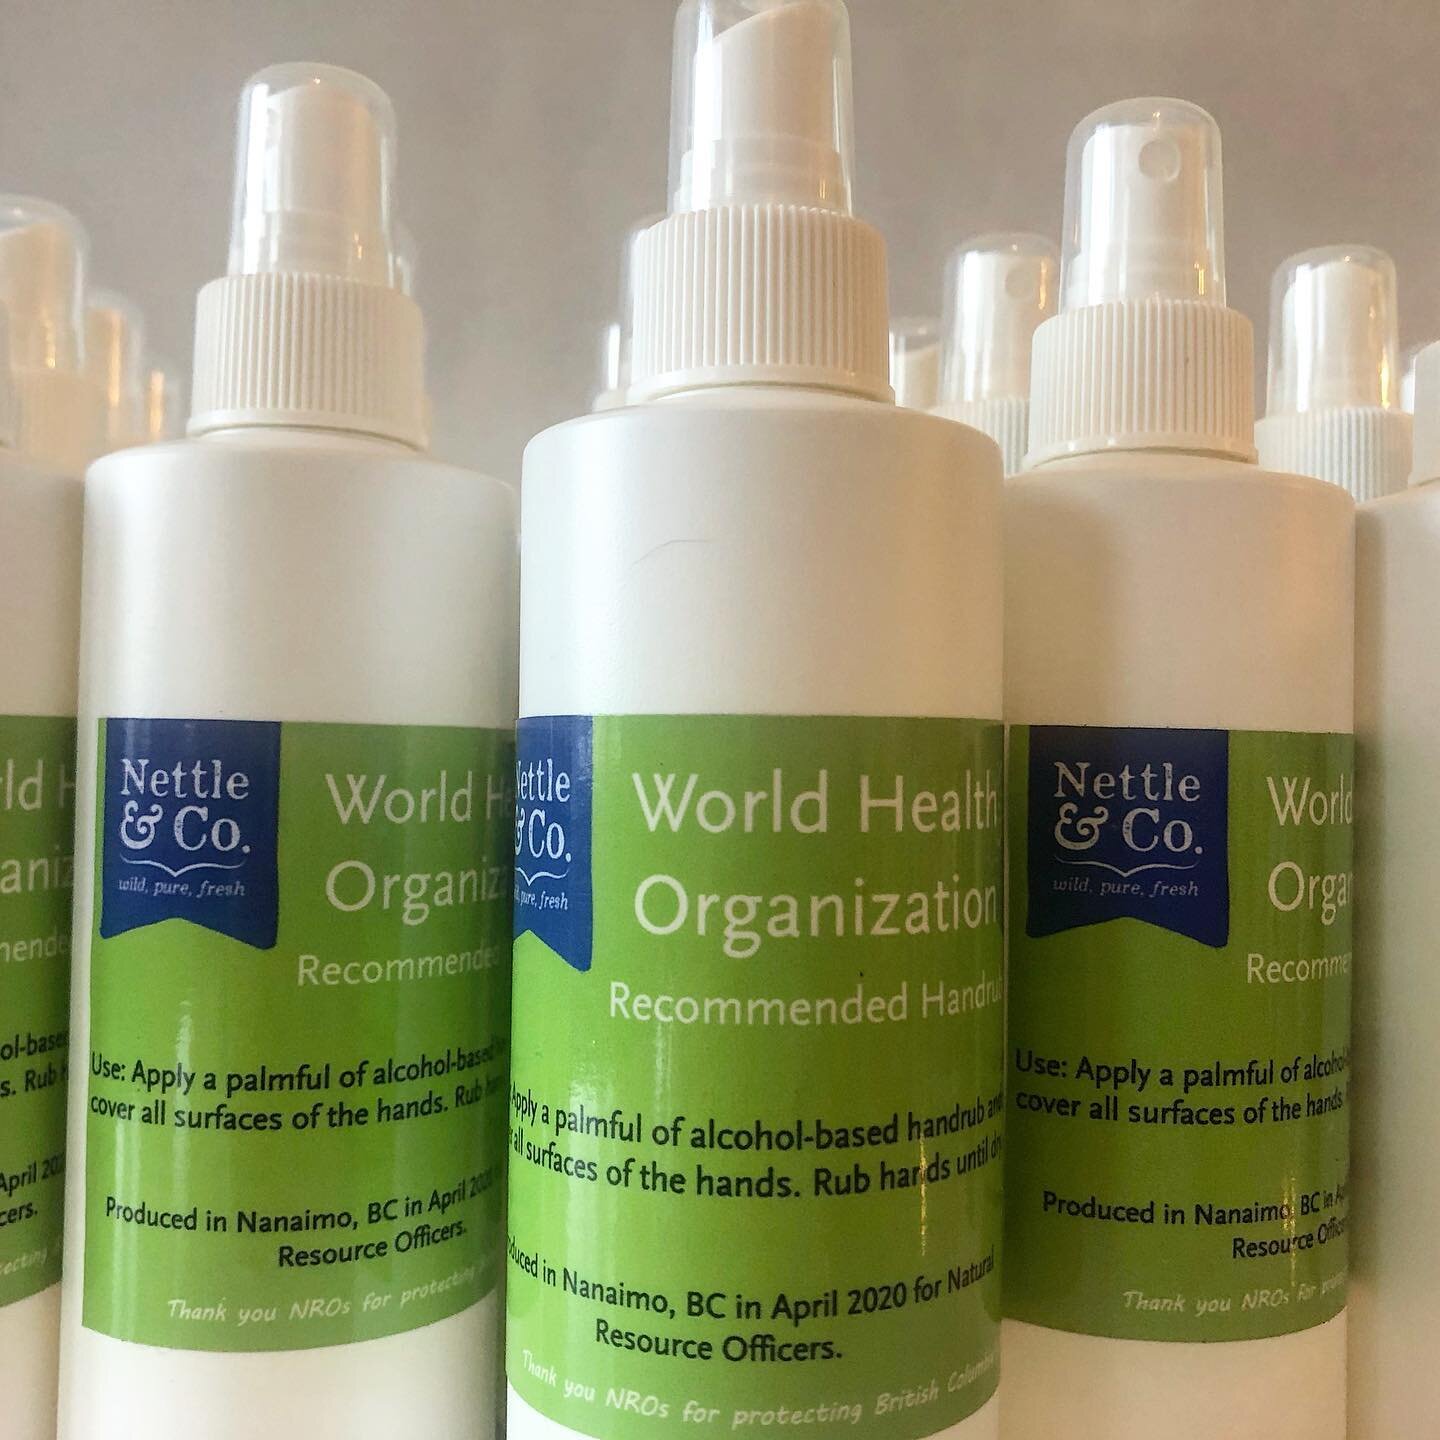 Just sent out 30 bottles of World Health Organization formula hand sanitizer to the BC Ministry of Forests, Lands and Natural Resource Operations for their Natural Resource Officers who are still working hard in the field to protect British Columbia&